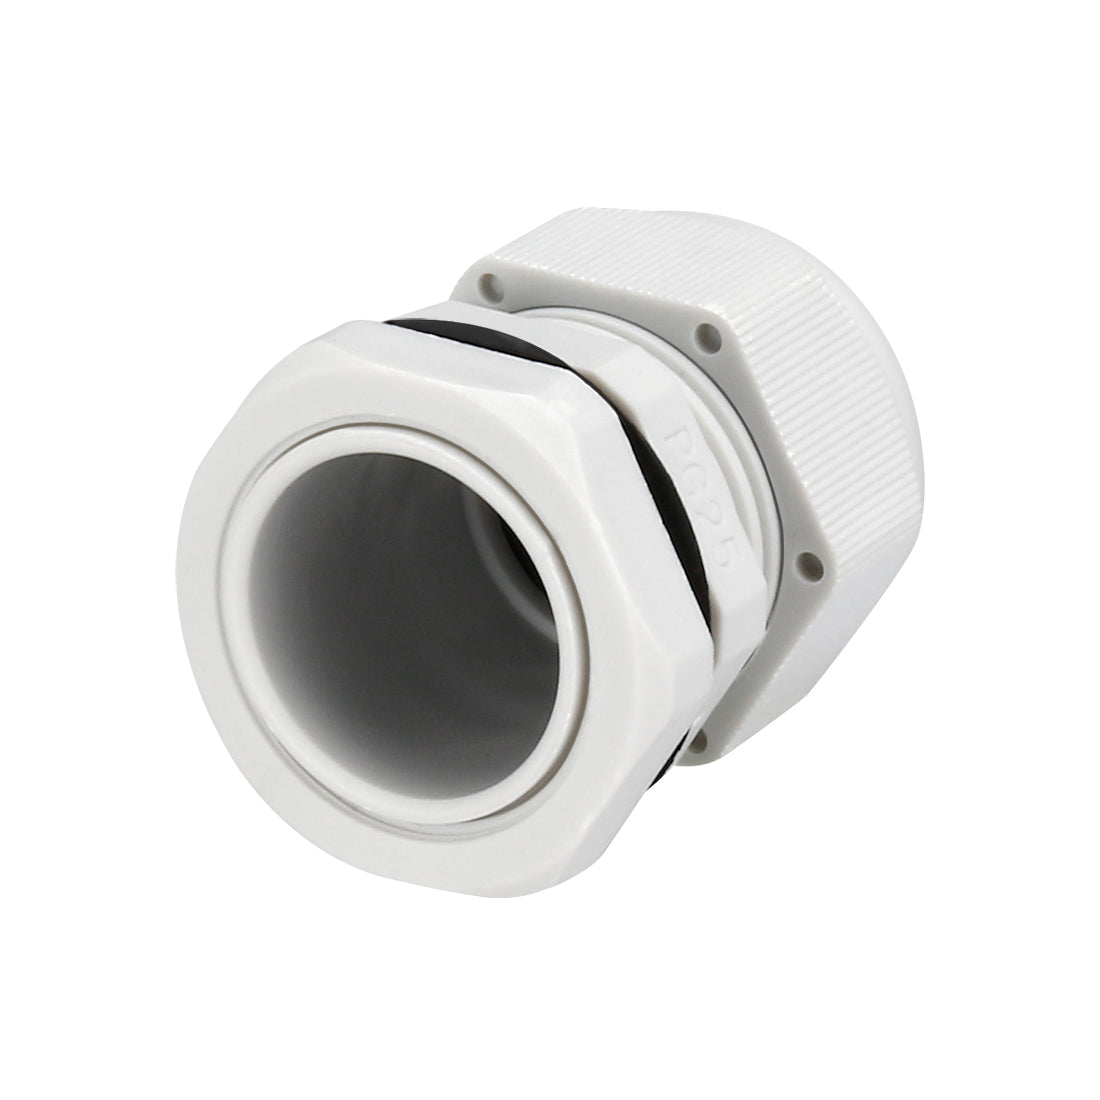 uxcell Uxcell 5Pcs PG25 Cable Gland Waterproof Plastic Joint Adjustable Locknut White for 16mm-21mm Dia Cable Wire